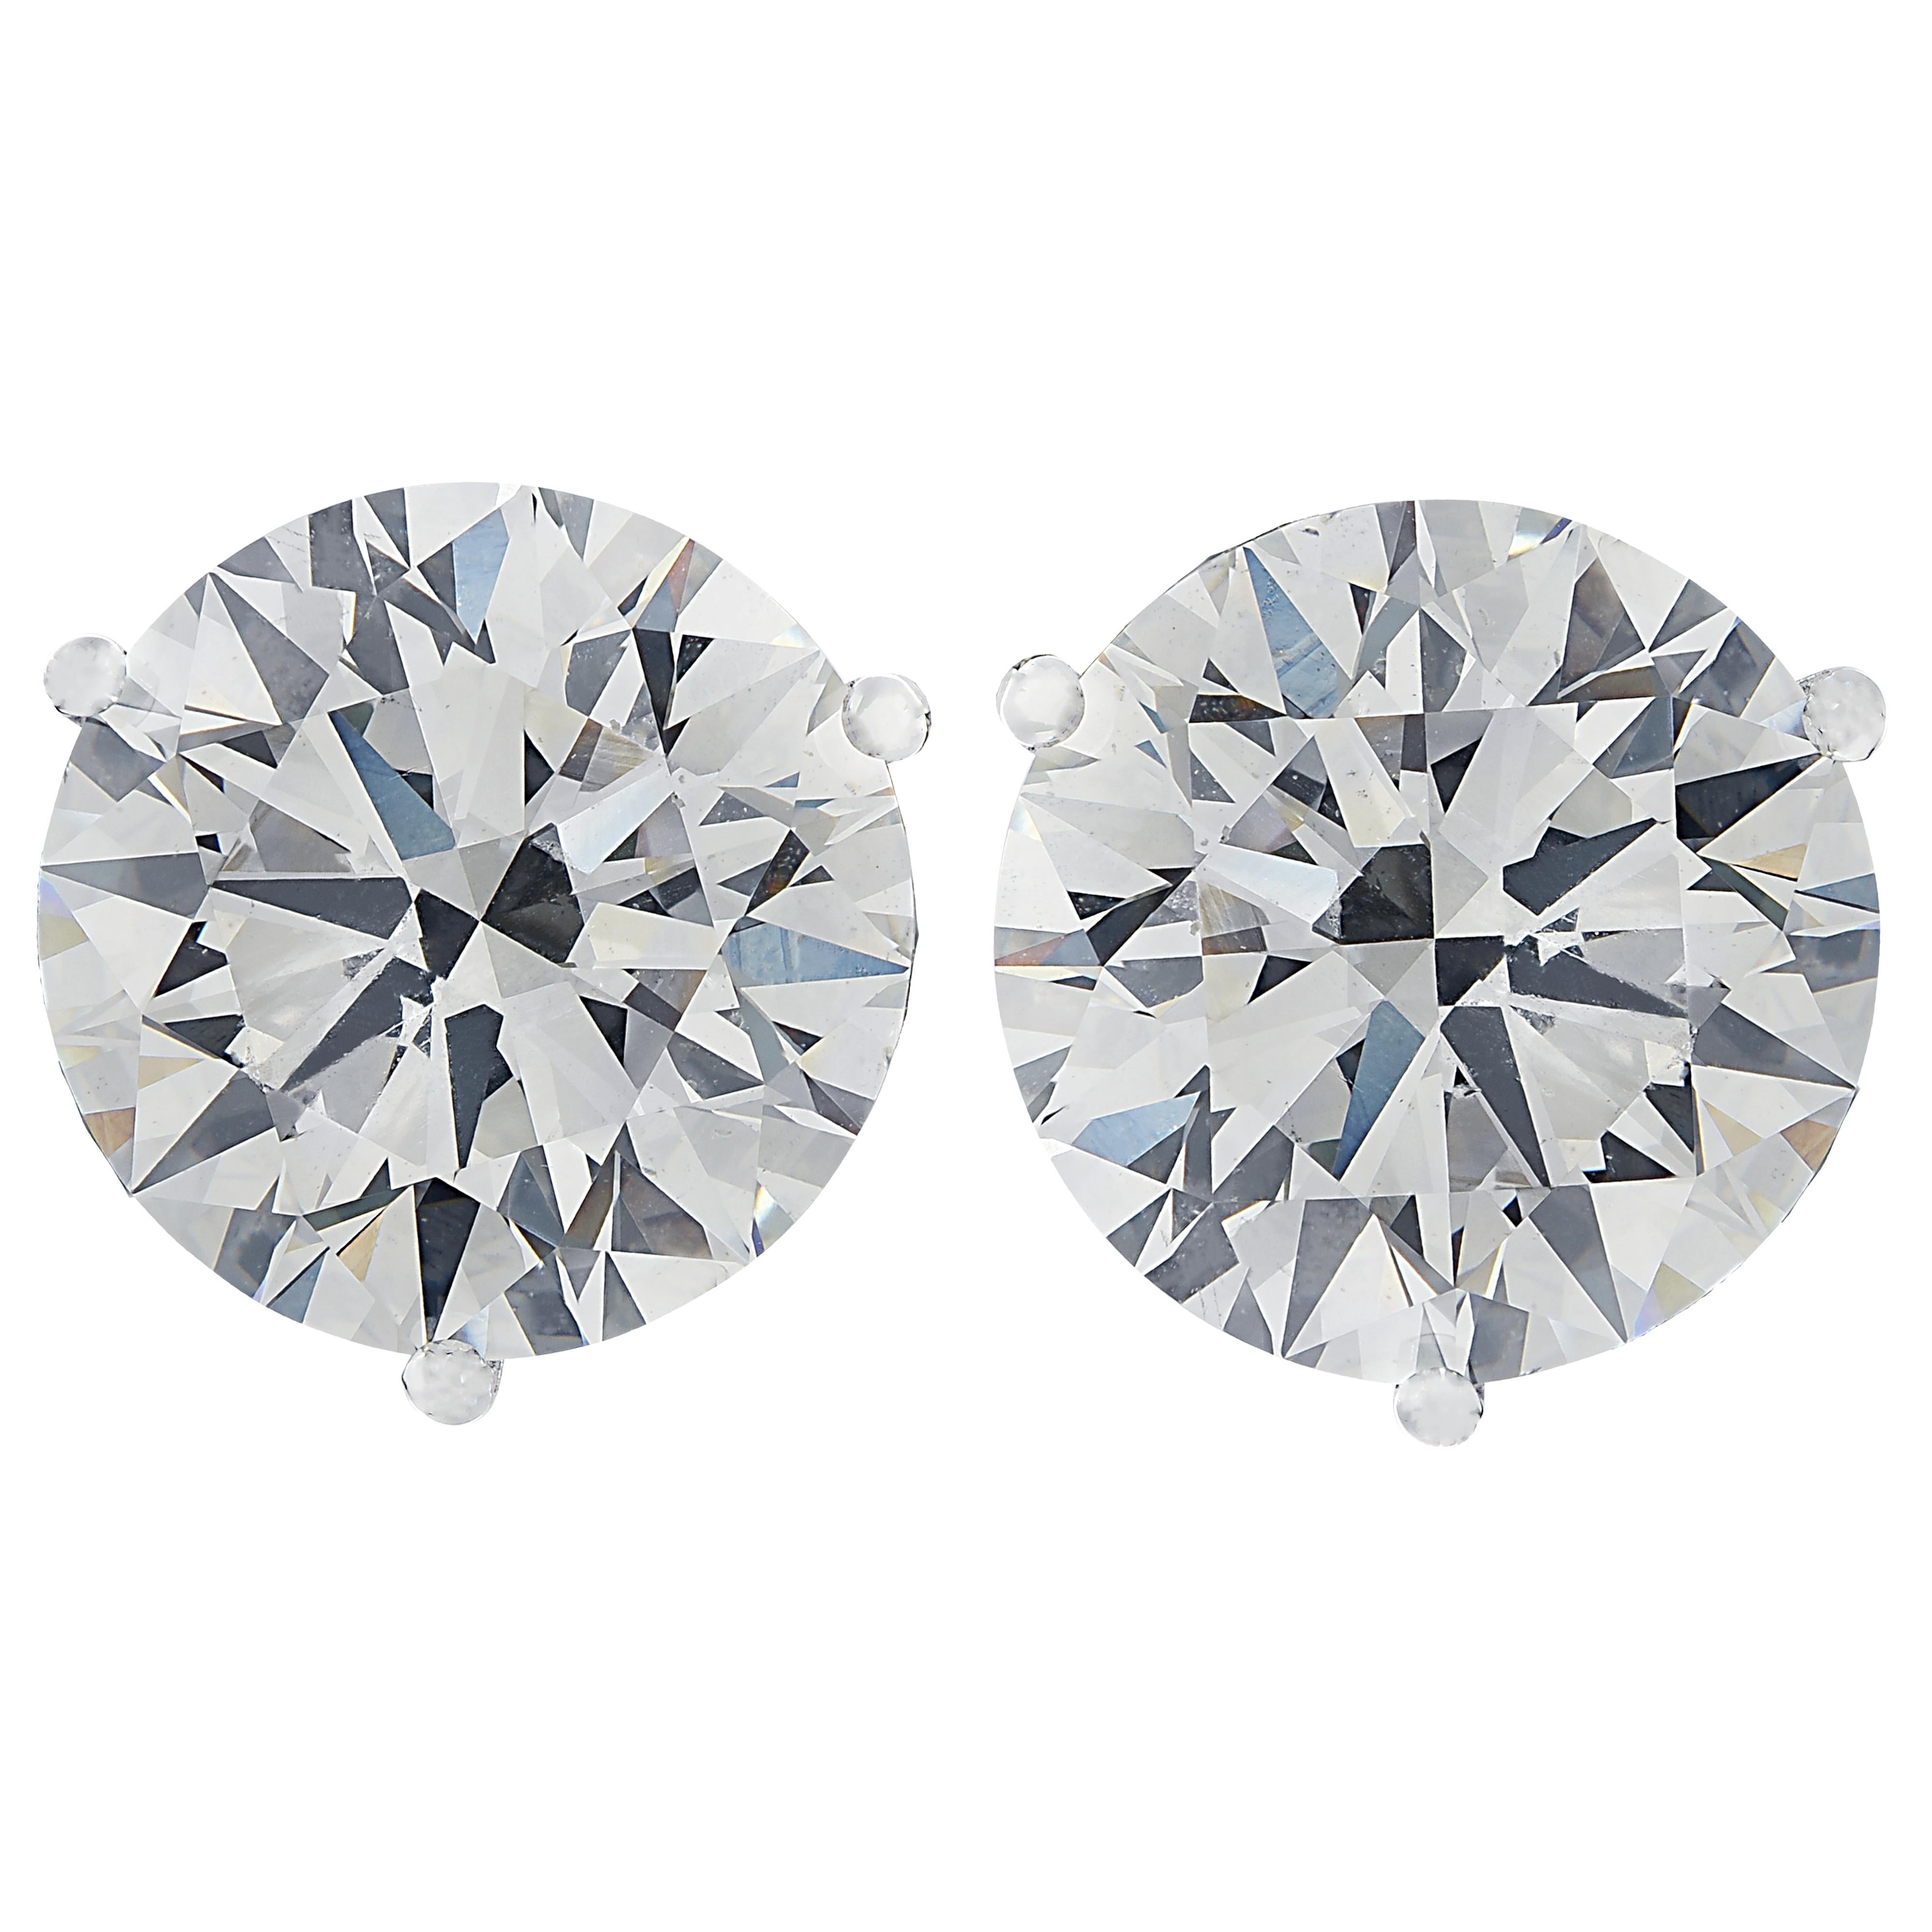 Stunning Vivid Diamonds solitaire stud earrings crafted in 18 karat white gold, showcasing 2 spectacular GIA certified round brilliant cut diamonds weighing 2.01 carats total, G color SI2 clarity. These diamonds were carefully selected and perfectly